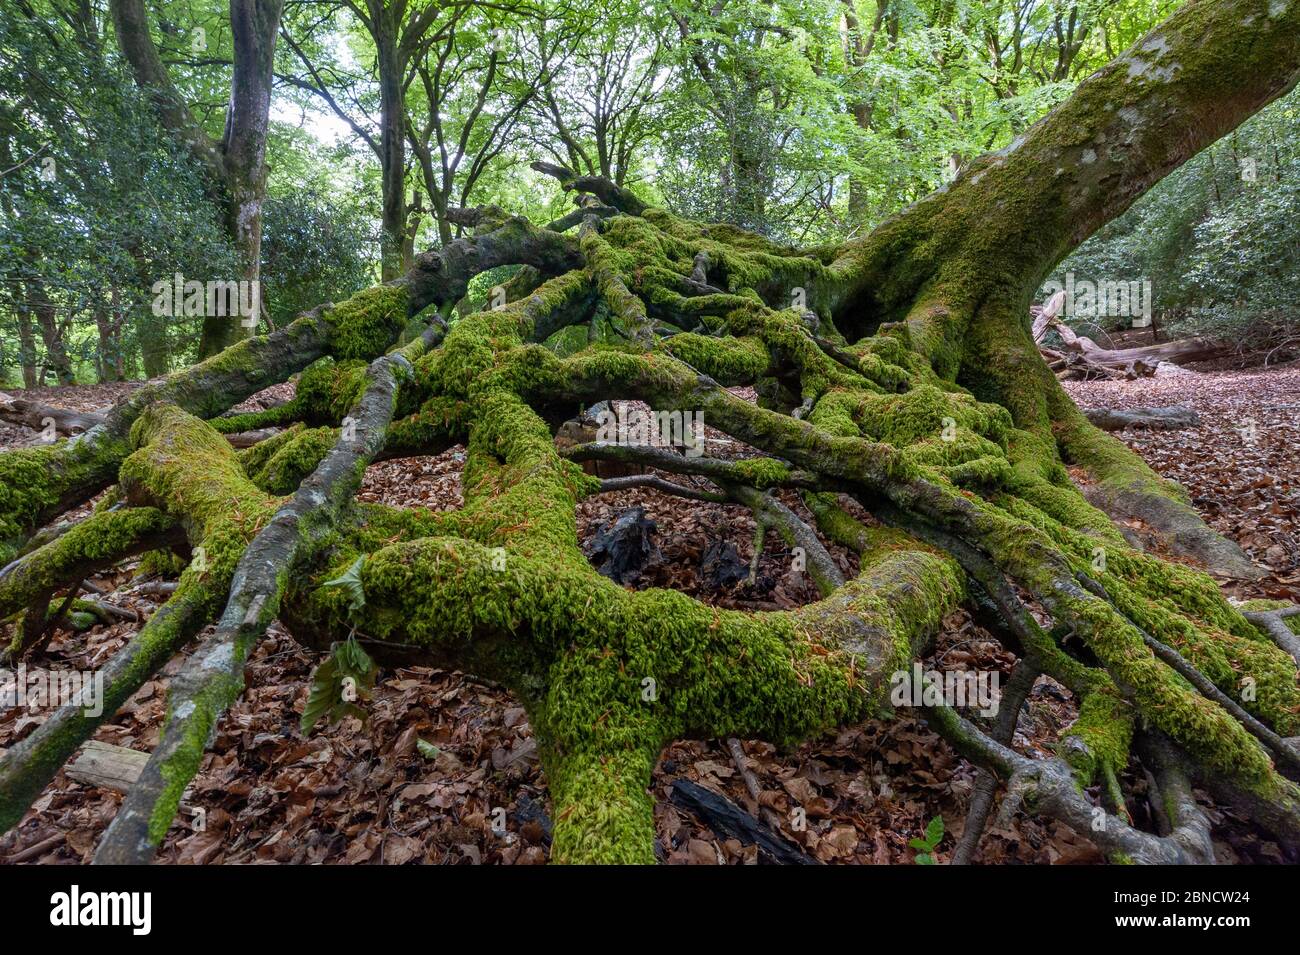 Tangled tree roots of a fallen tree in a forest covered in moss Stock Photo